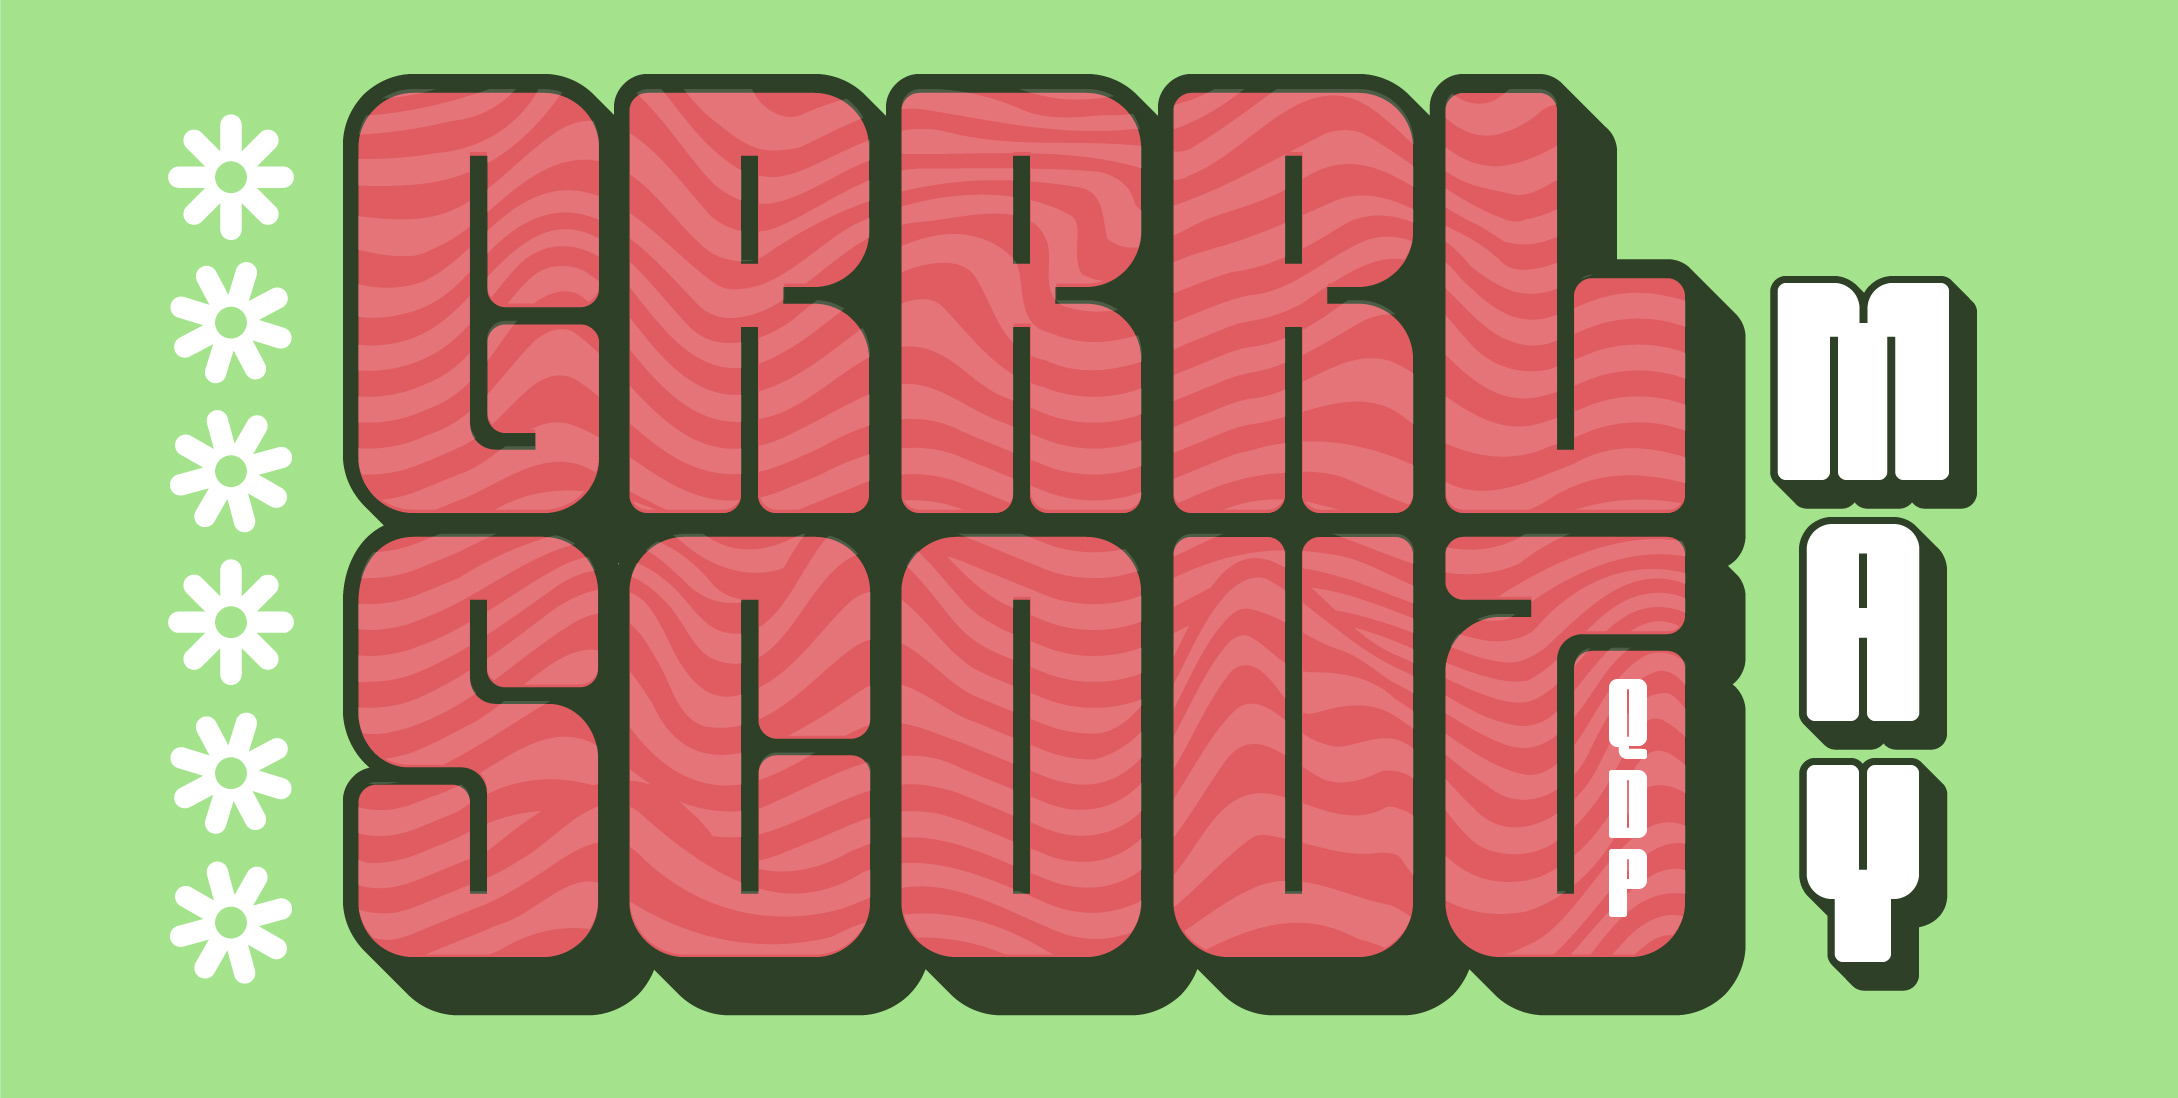 GRRRL SCOUT: MAY QUEER DANCE PARTY May 13, 2023 The Hook and Ladder Theater Doors 9:30pm - 1am :: 21+ General Admission*: $10 Early / $15 Advance / $20 Day of Show / $30 (Flat) Door (Limited QTY Available) *Note: Additional fees may apply